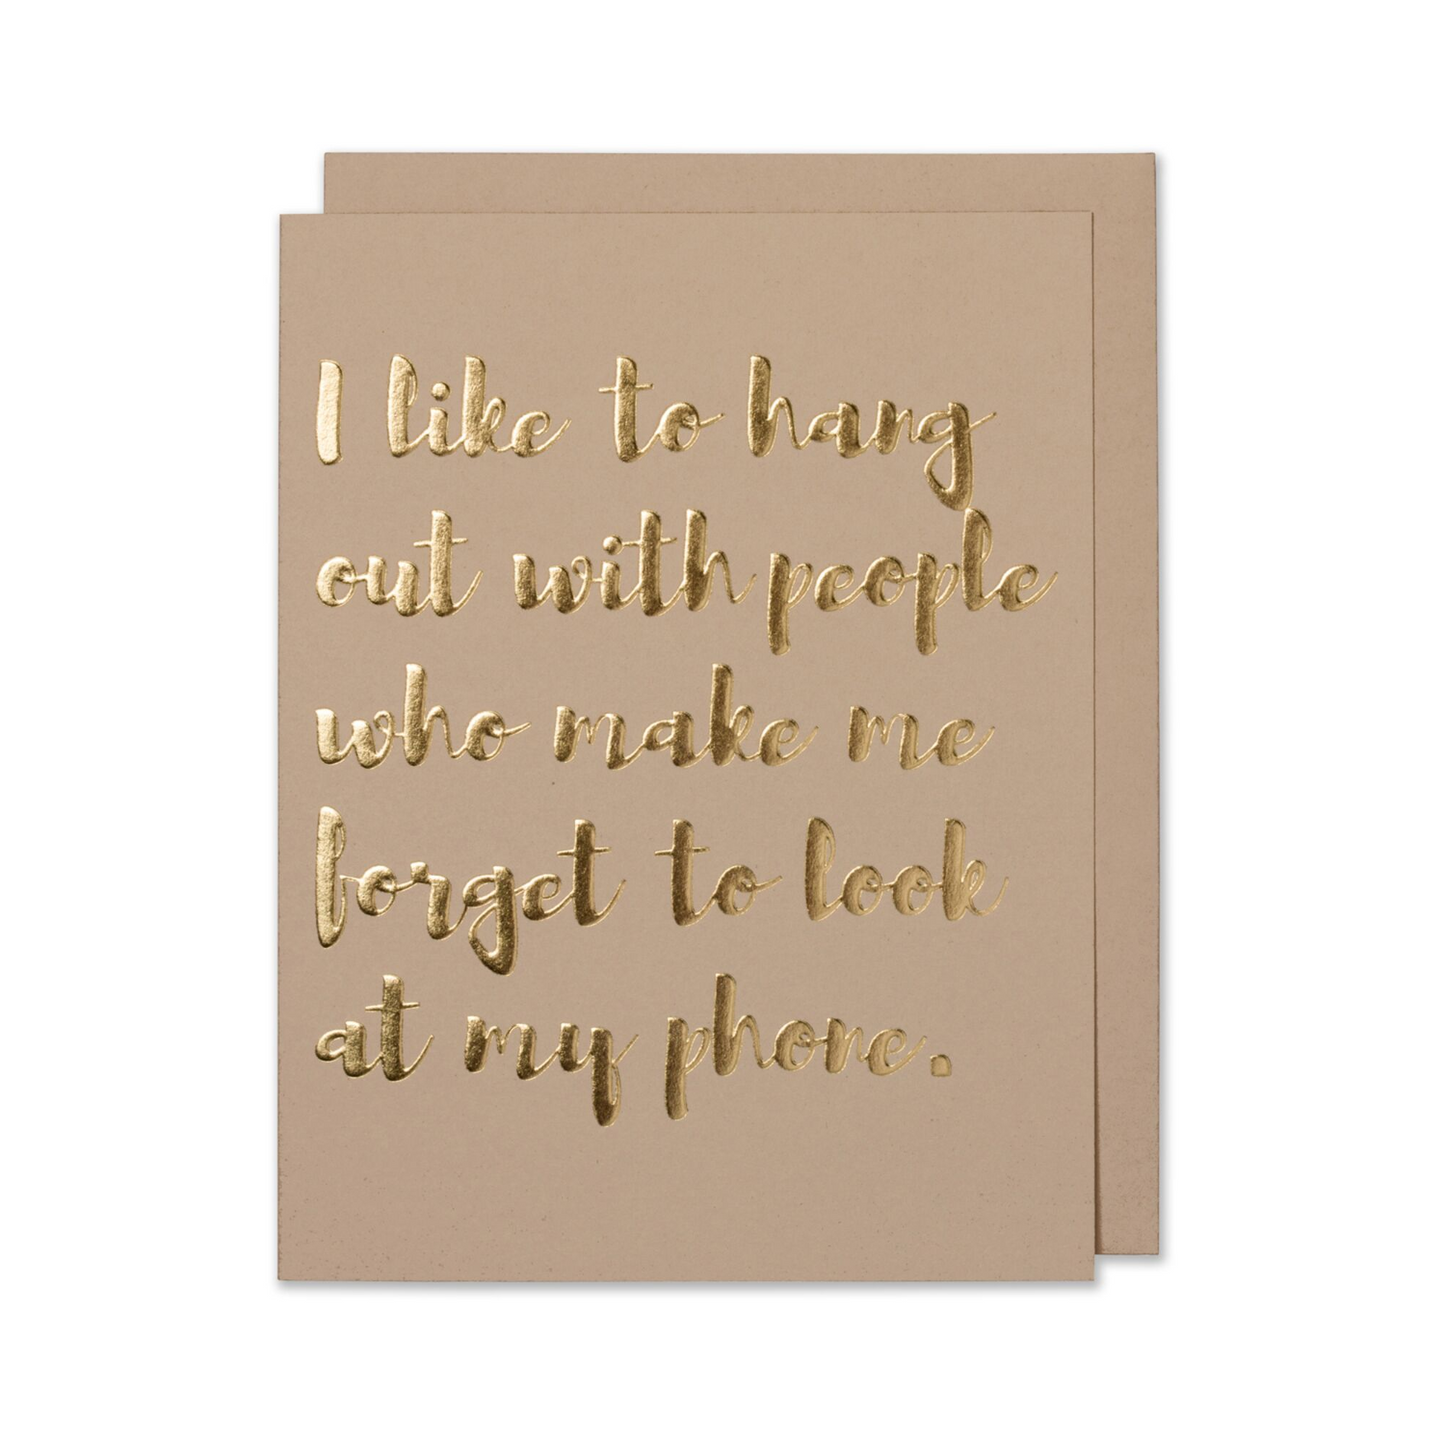 Friend Quote Card - I Like To Hang Out With People Who Make Me Forget To Look At My Phone.